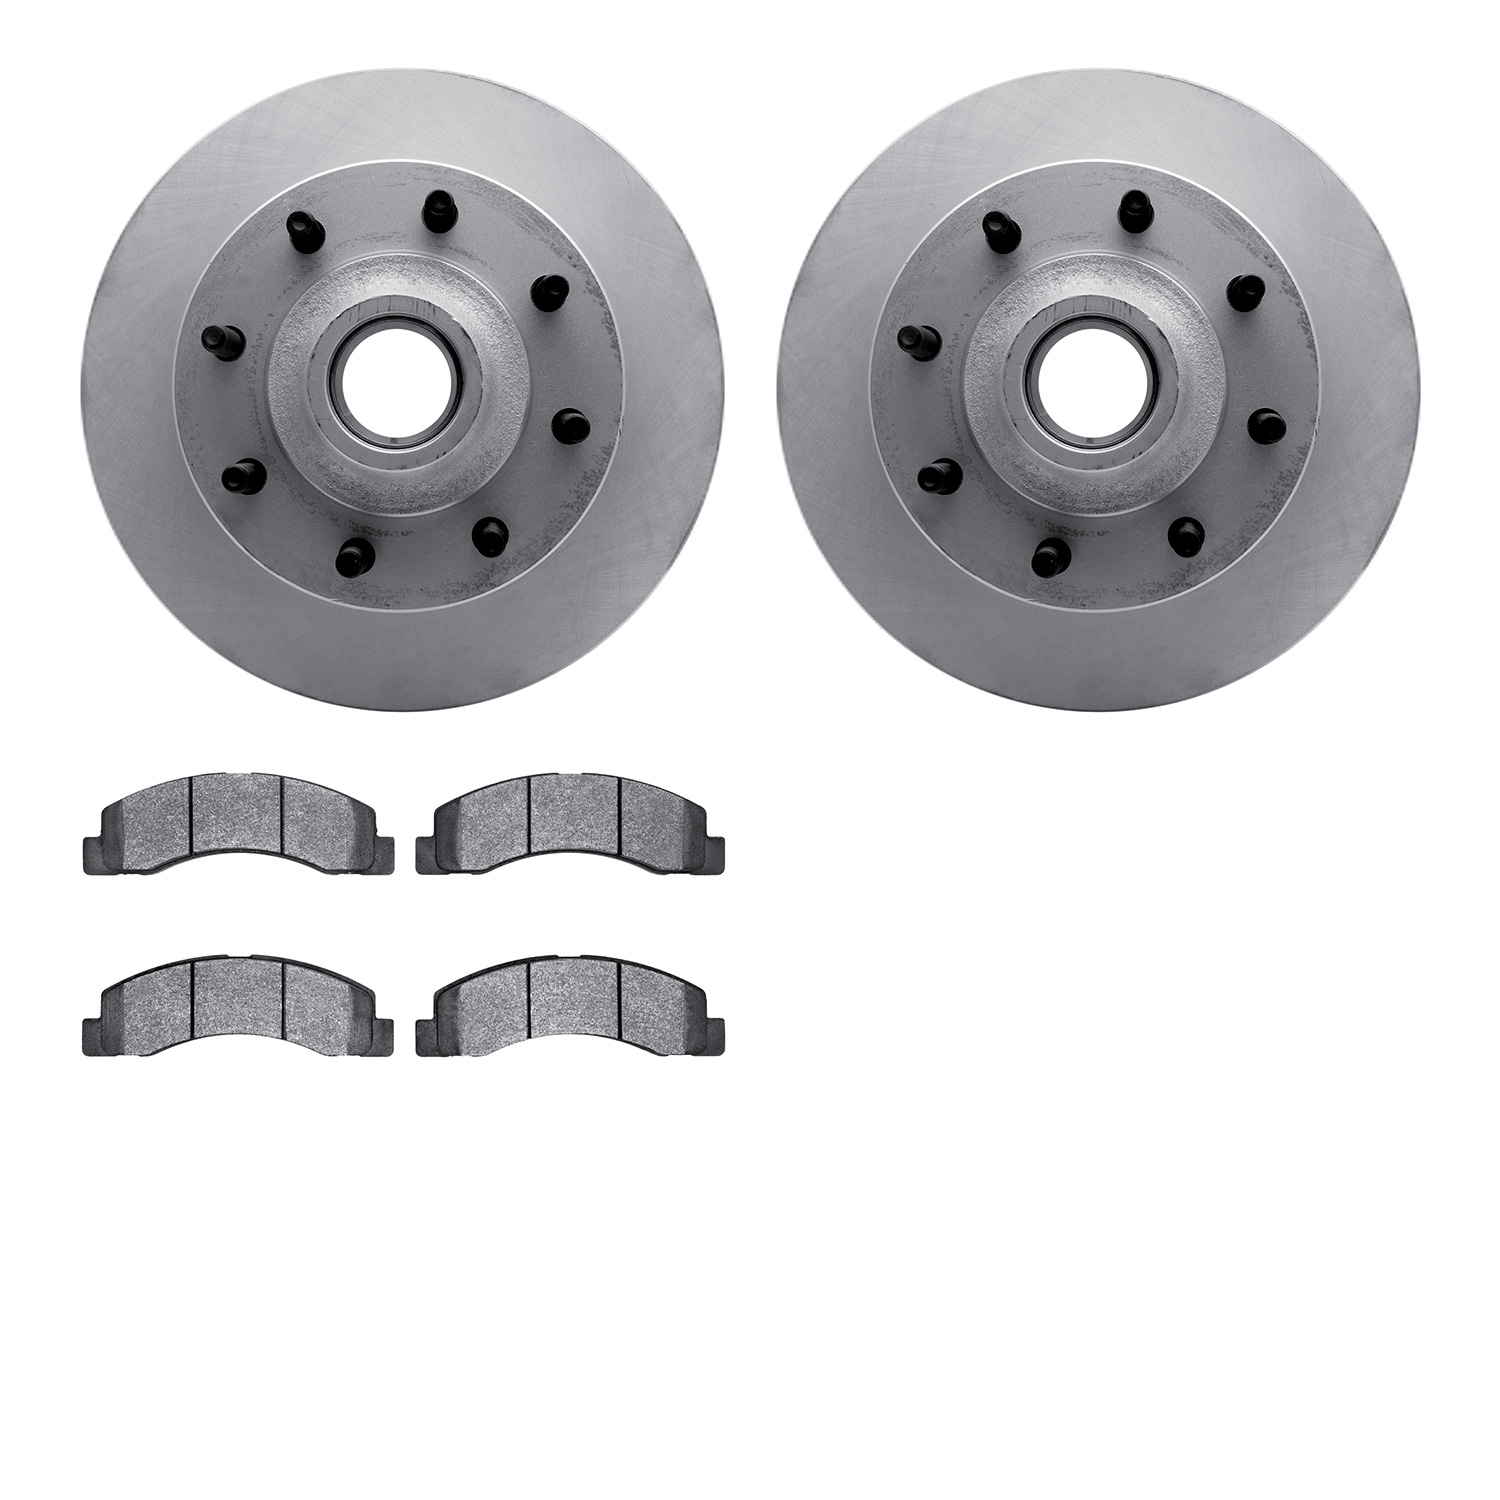 4402-54050 Geospec Brake Rotors with Ultimate-Duty Brake Pads Kit, 2003-2005 Ford/Lincoln/Mercury/Mazda, Position: Front